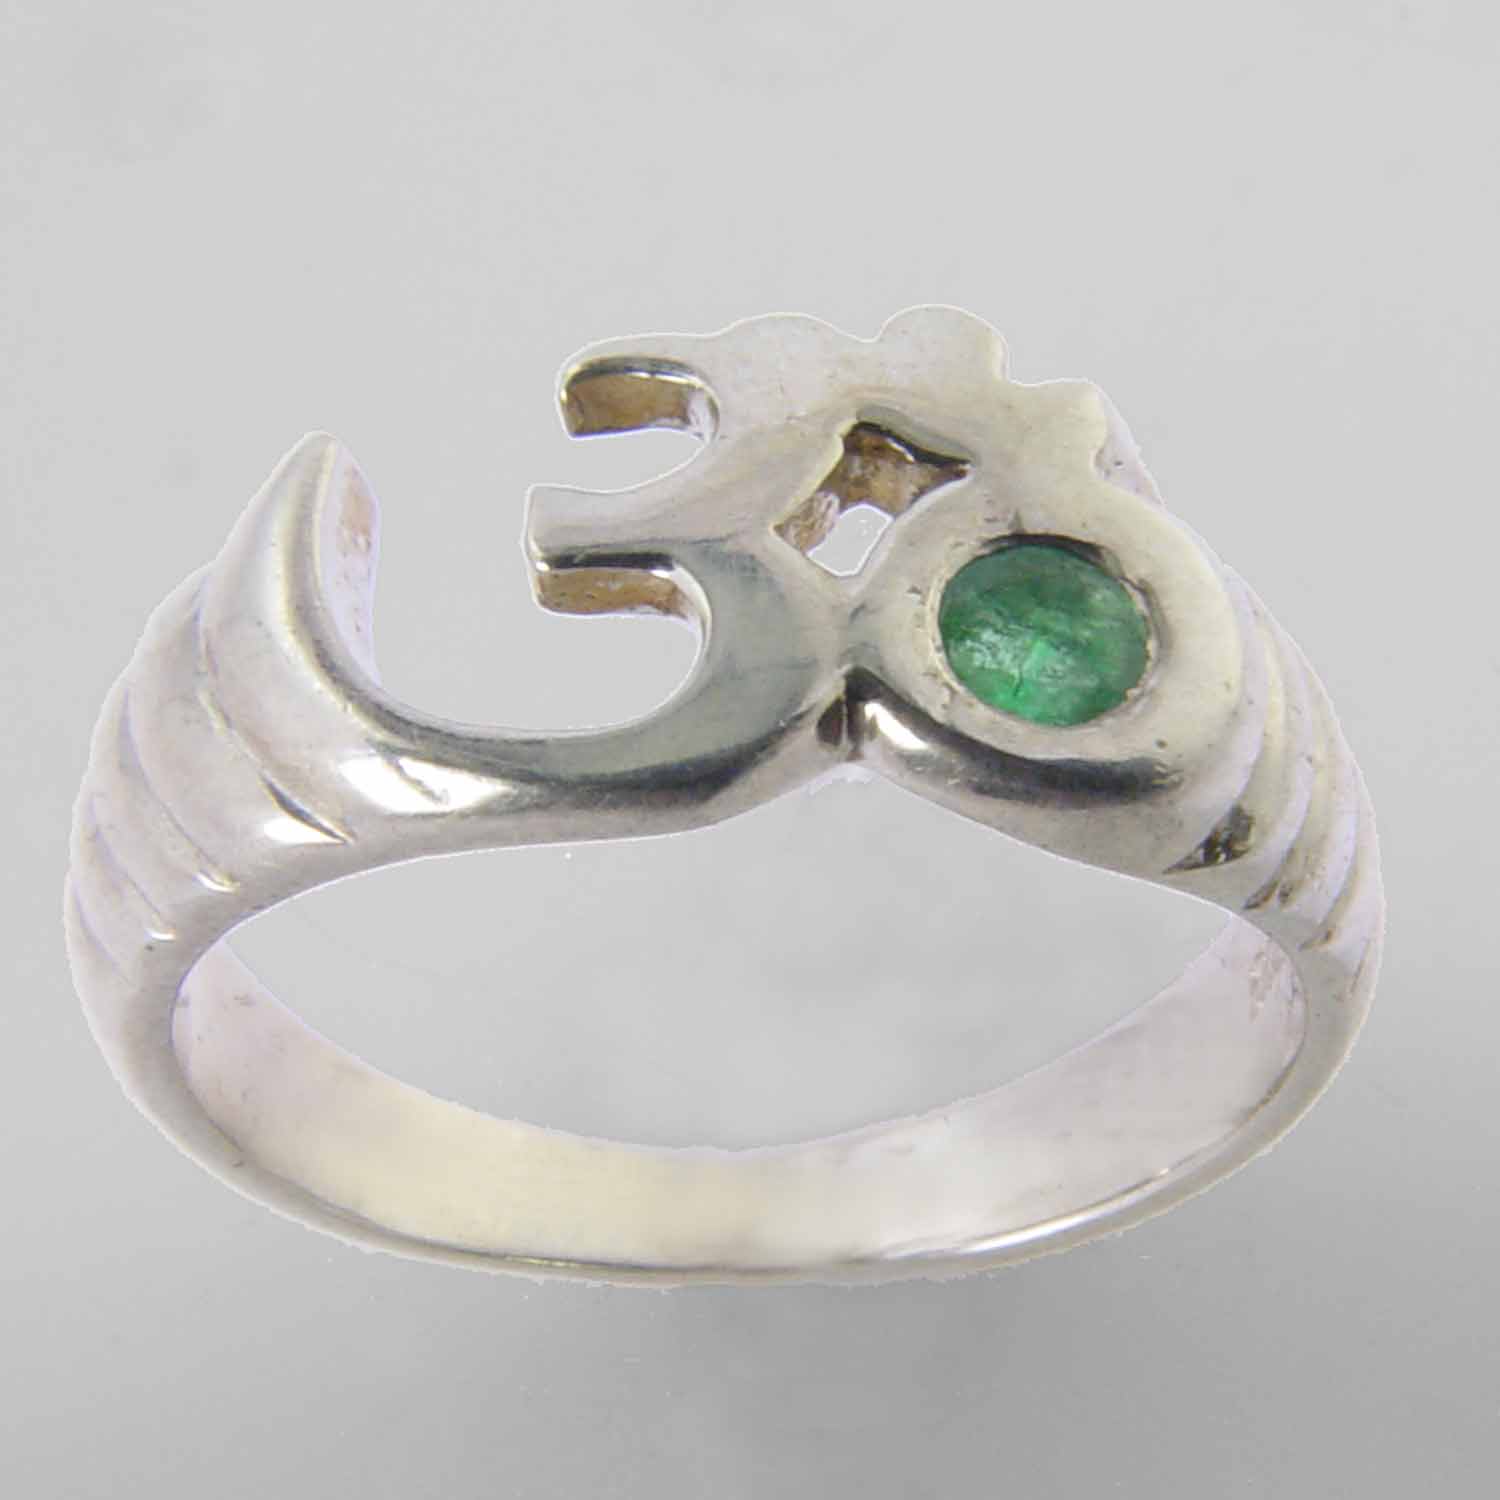 Aum Ring with Small Faceted Emerald in Sterling Silver, Size 6.5